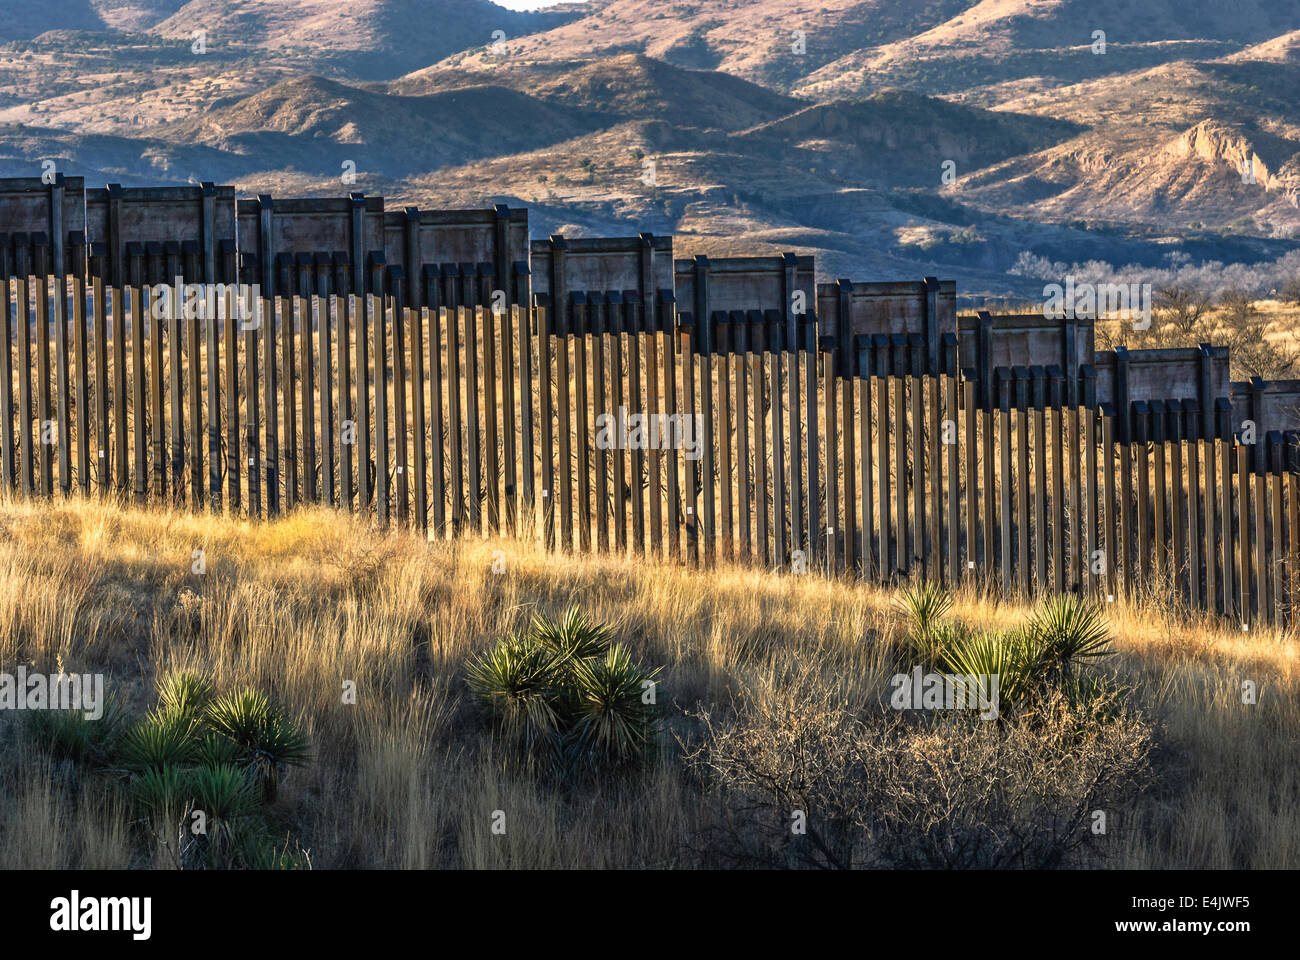 Massive 16 foot tall US border fence on border with Mexico, about 6 miles east of Nogales Arizona, USA, looking south to Mexico Stock Photo